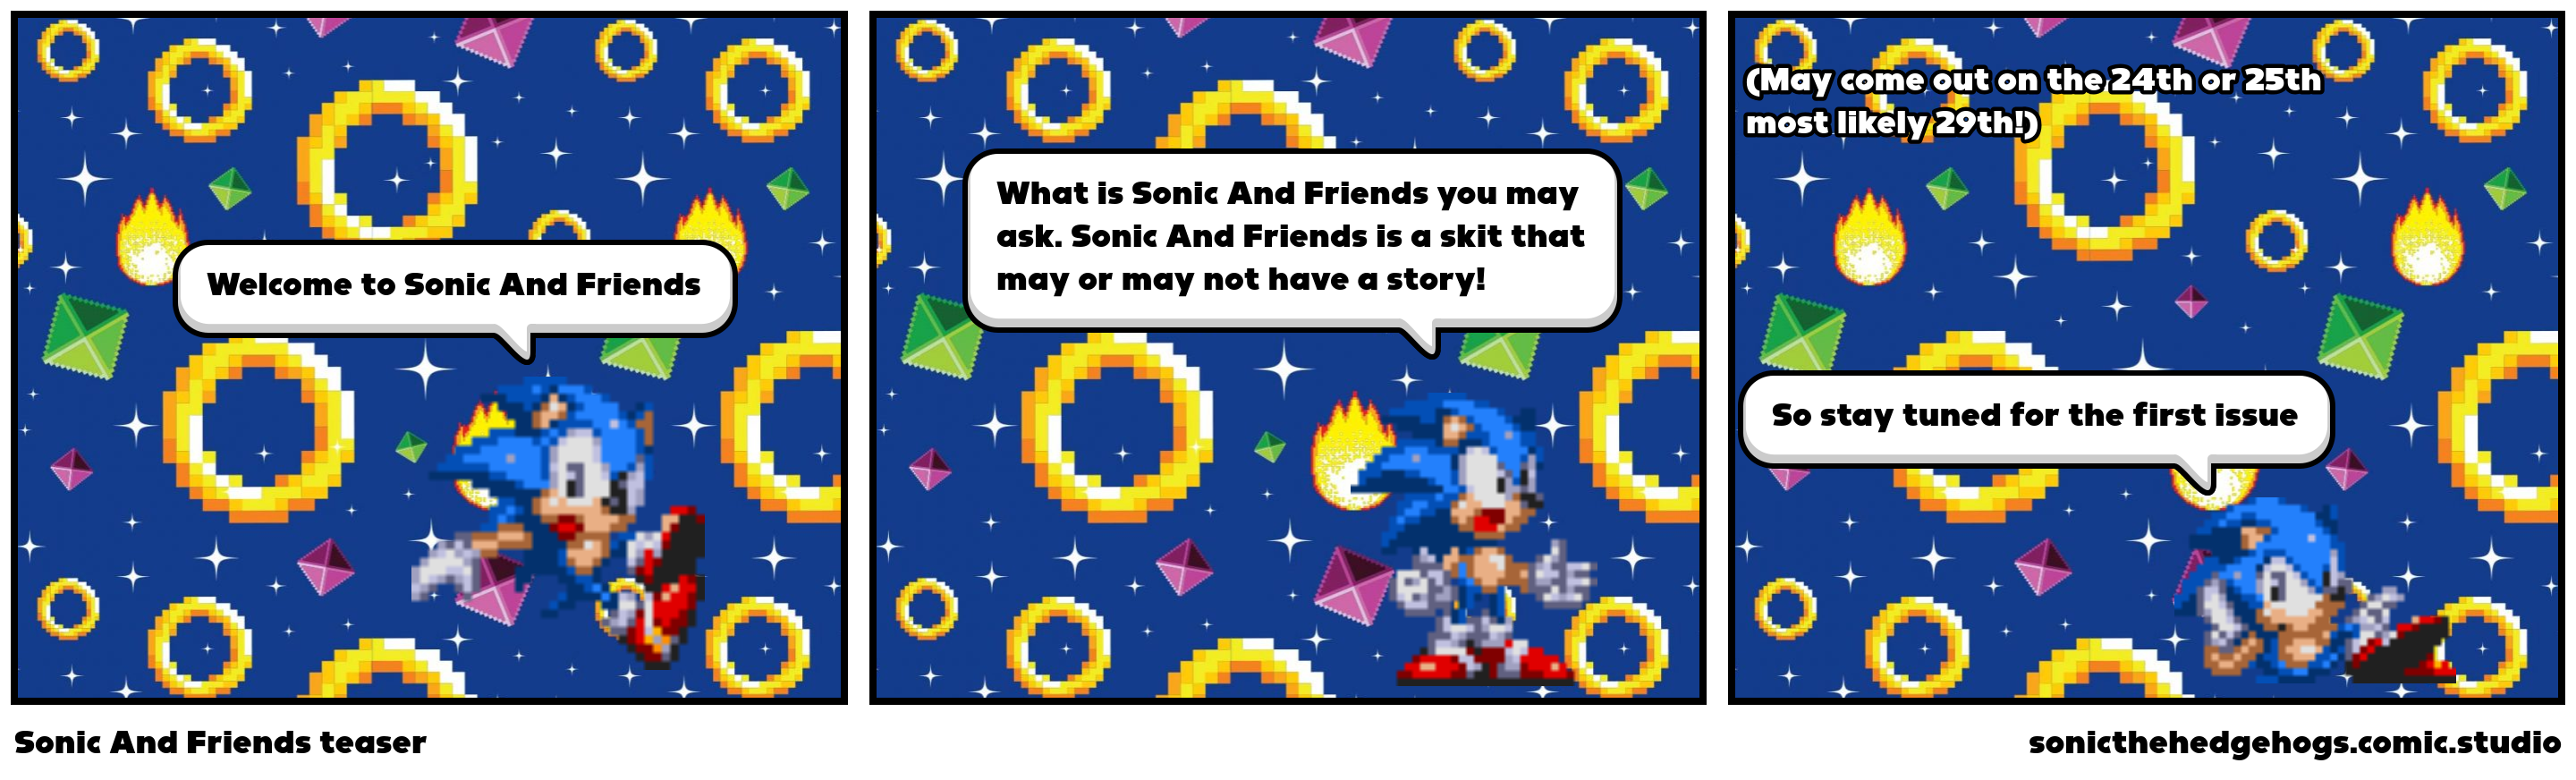 Sonic And Friends teaser